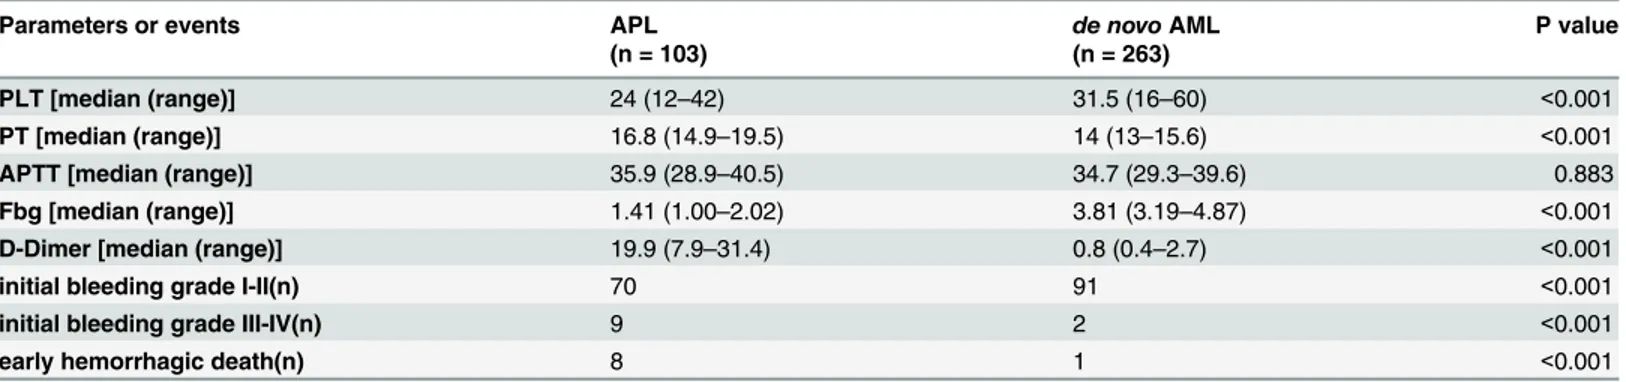 Table 1. Evaluation of hemostatic parameters and Incidence of bleeding events in patients with APL or de novo AML (other than APL).